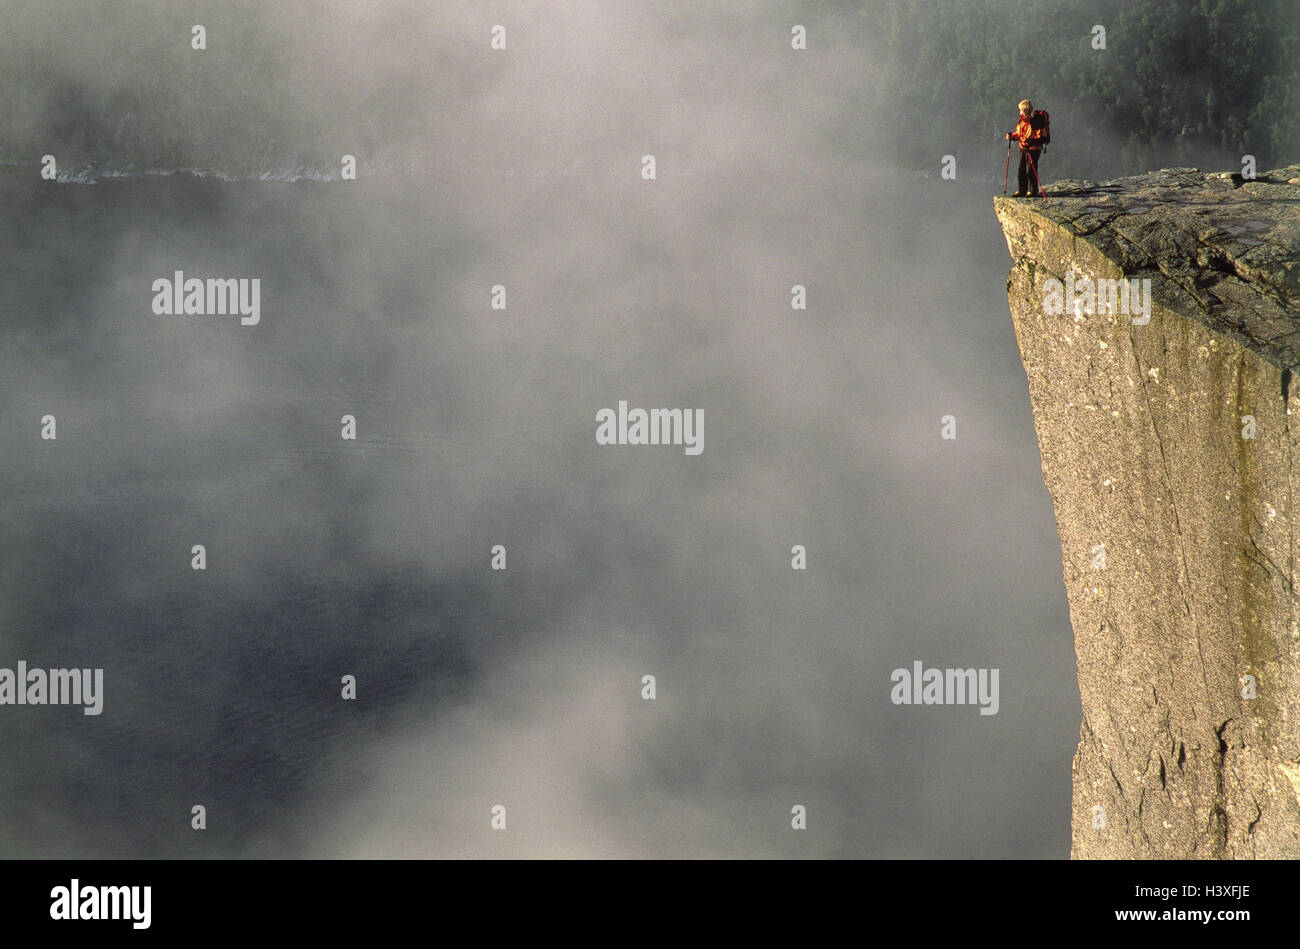 Ledge, mountain climbers, outlook,  enjoys, fogs   Landscape, rocks, canyon, steep coast, steeply, plateau, rock plateau, lead, trip, Trekking, pause, expedition, adventures, concept, dropouts, however, loneliness, nature-loving ness, loners, freedom, fre Stock Photo